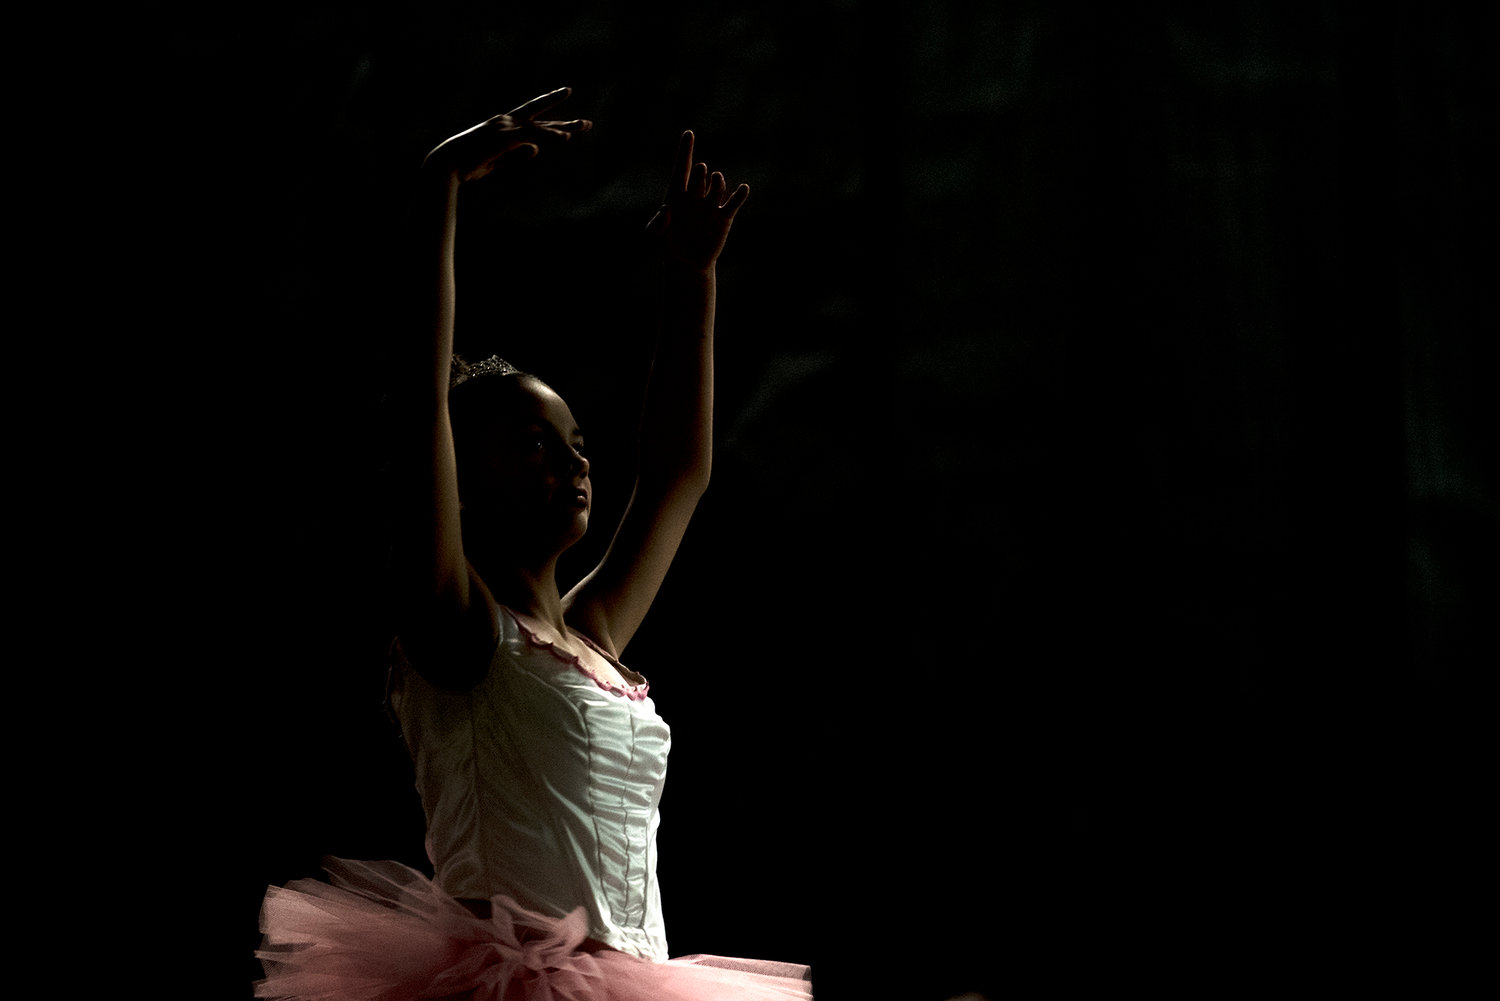 A ballerina performs during the first act of the Nutcracker on Saturday in Pe Ell.